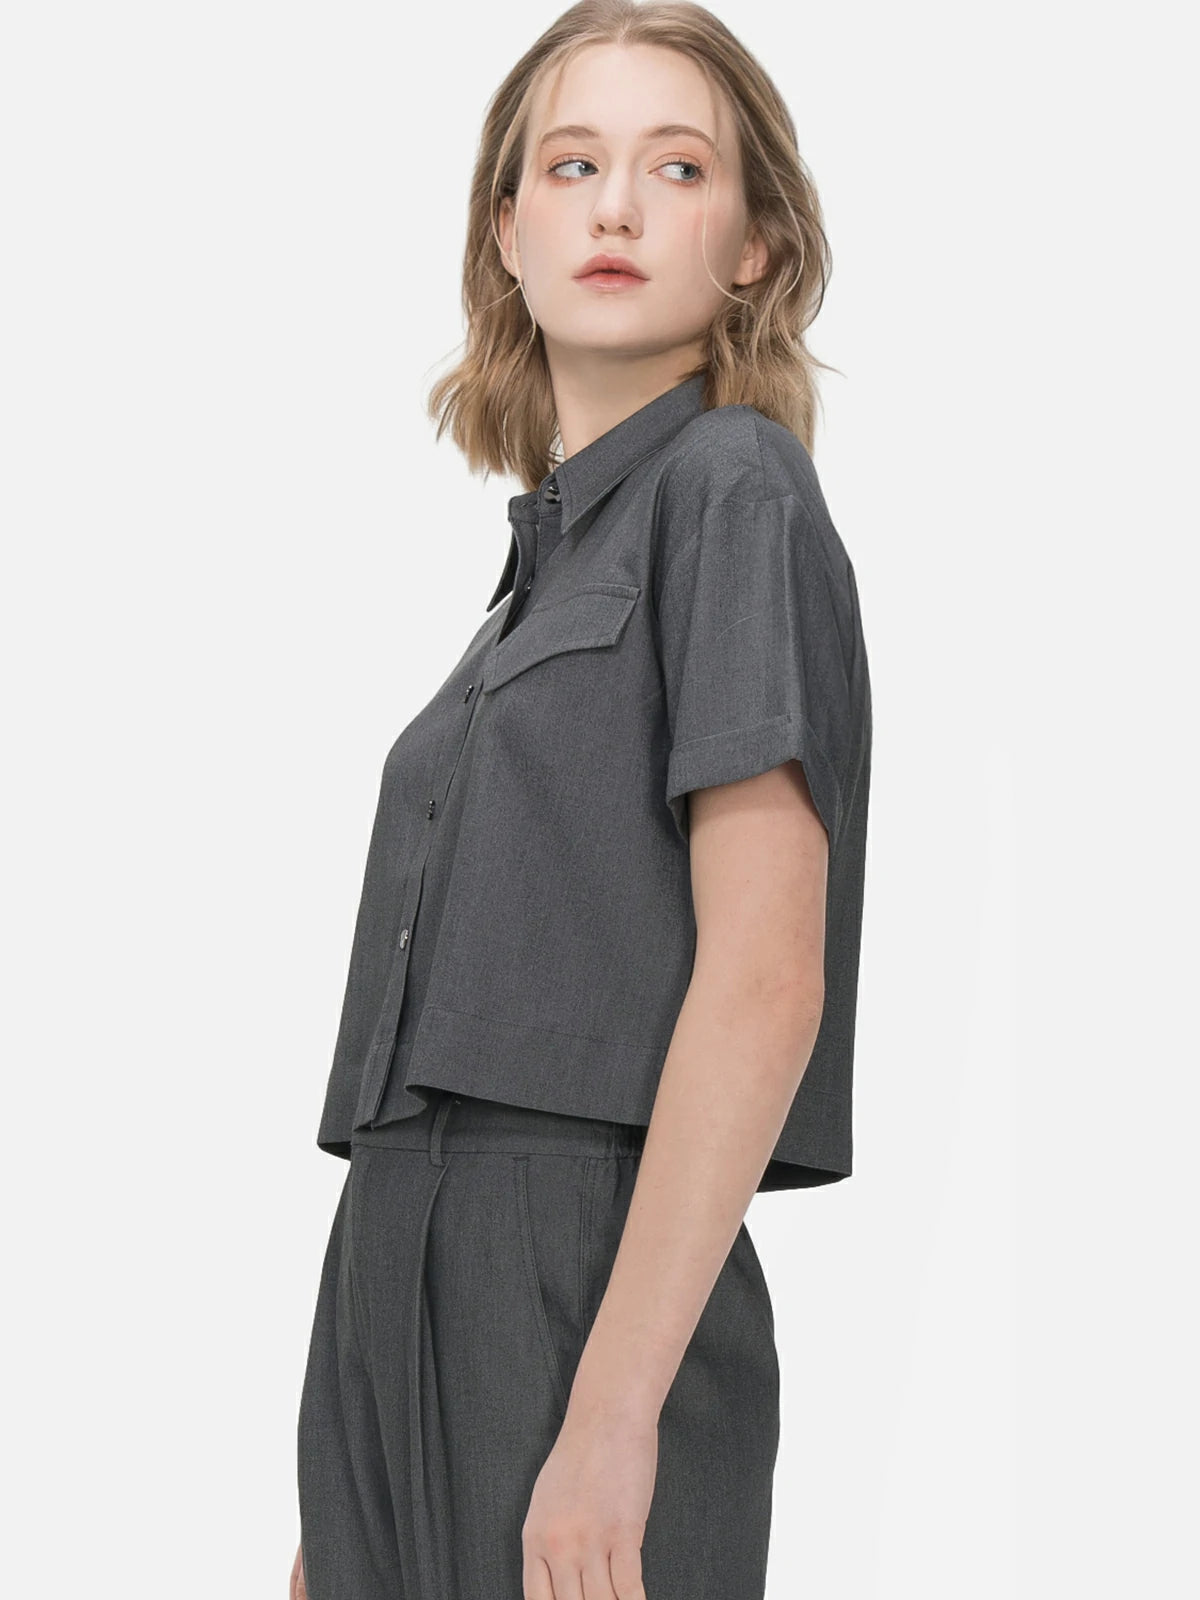 Unique lapel collar shirt with whimsical faux pocket patchwork and rolled cuff, offering a distinctive and stylish option for casual and relaxed summer occasions.